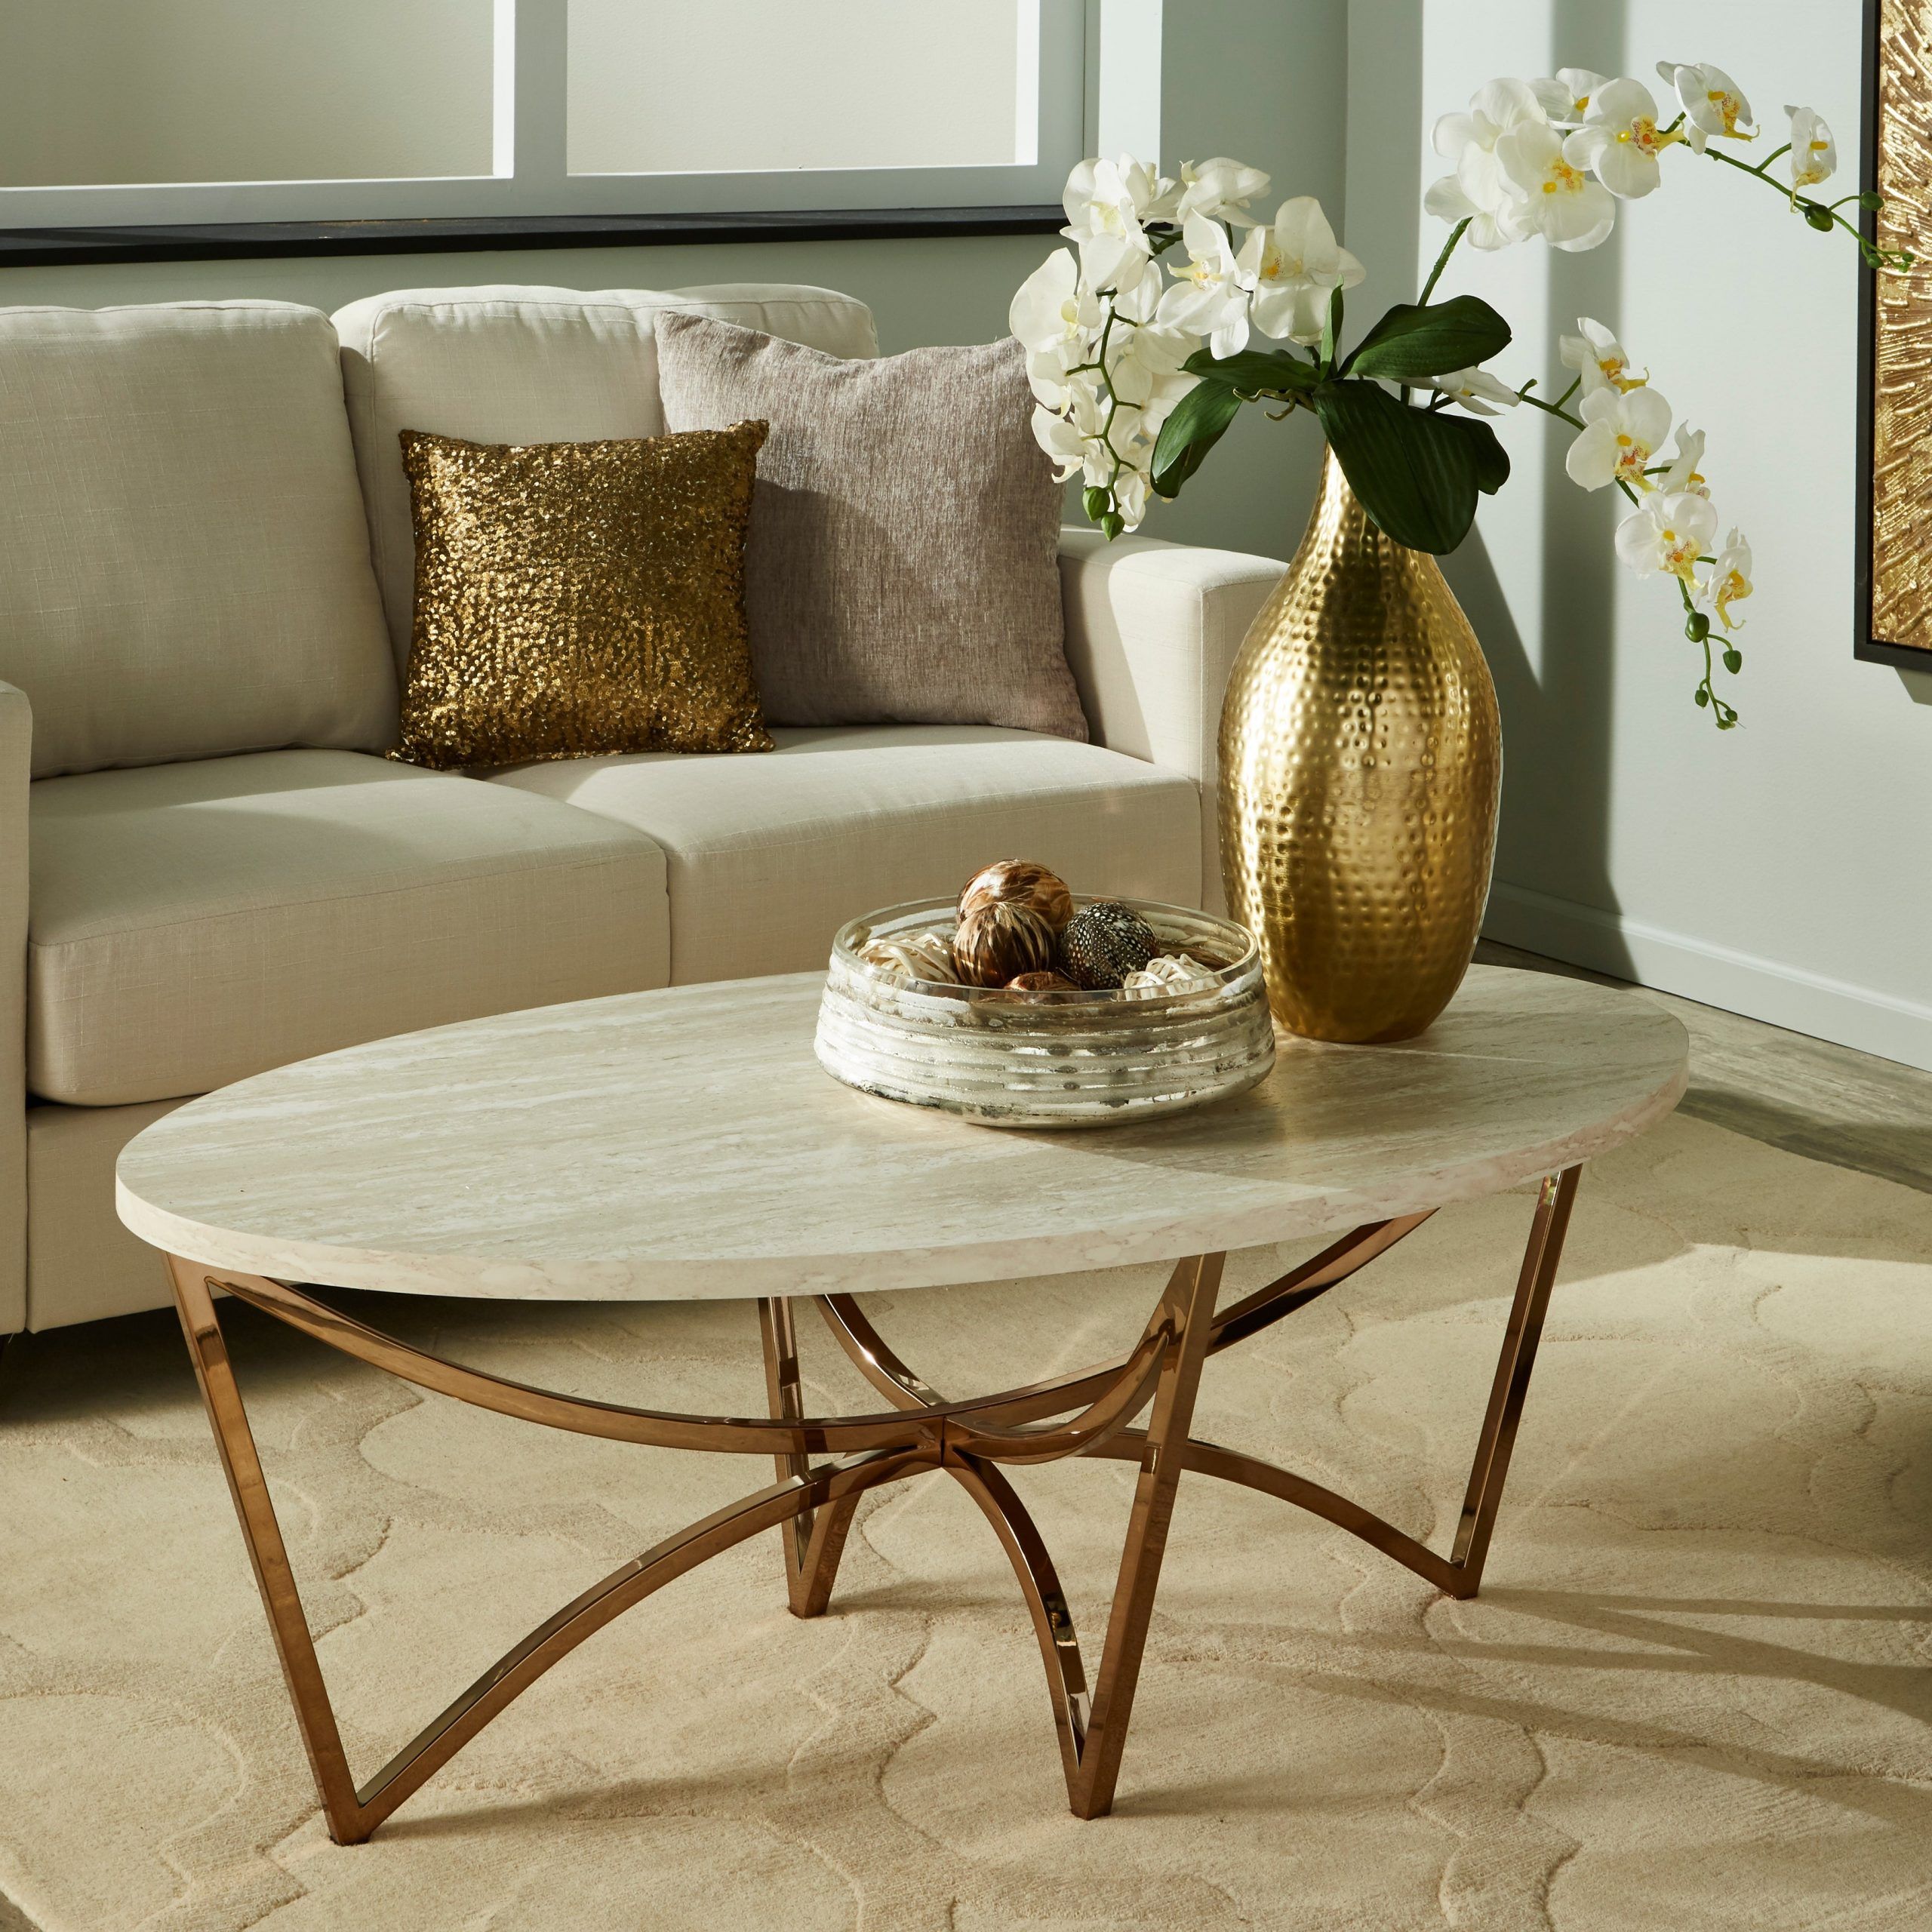 Gottlieb Round Glass Gold Coffee Table / Vittoria Pertaining To Popular Gold Cocktail Tables (View 8 of 20)